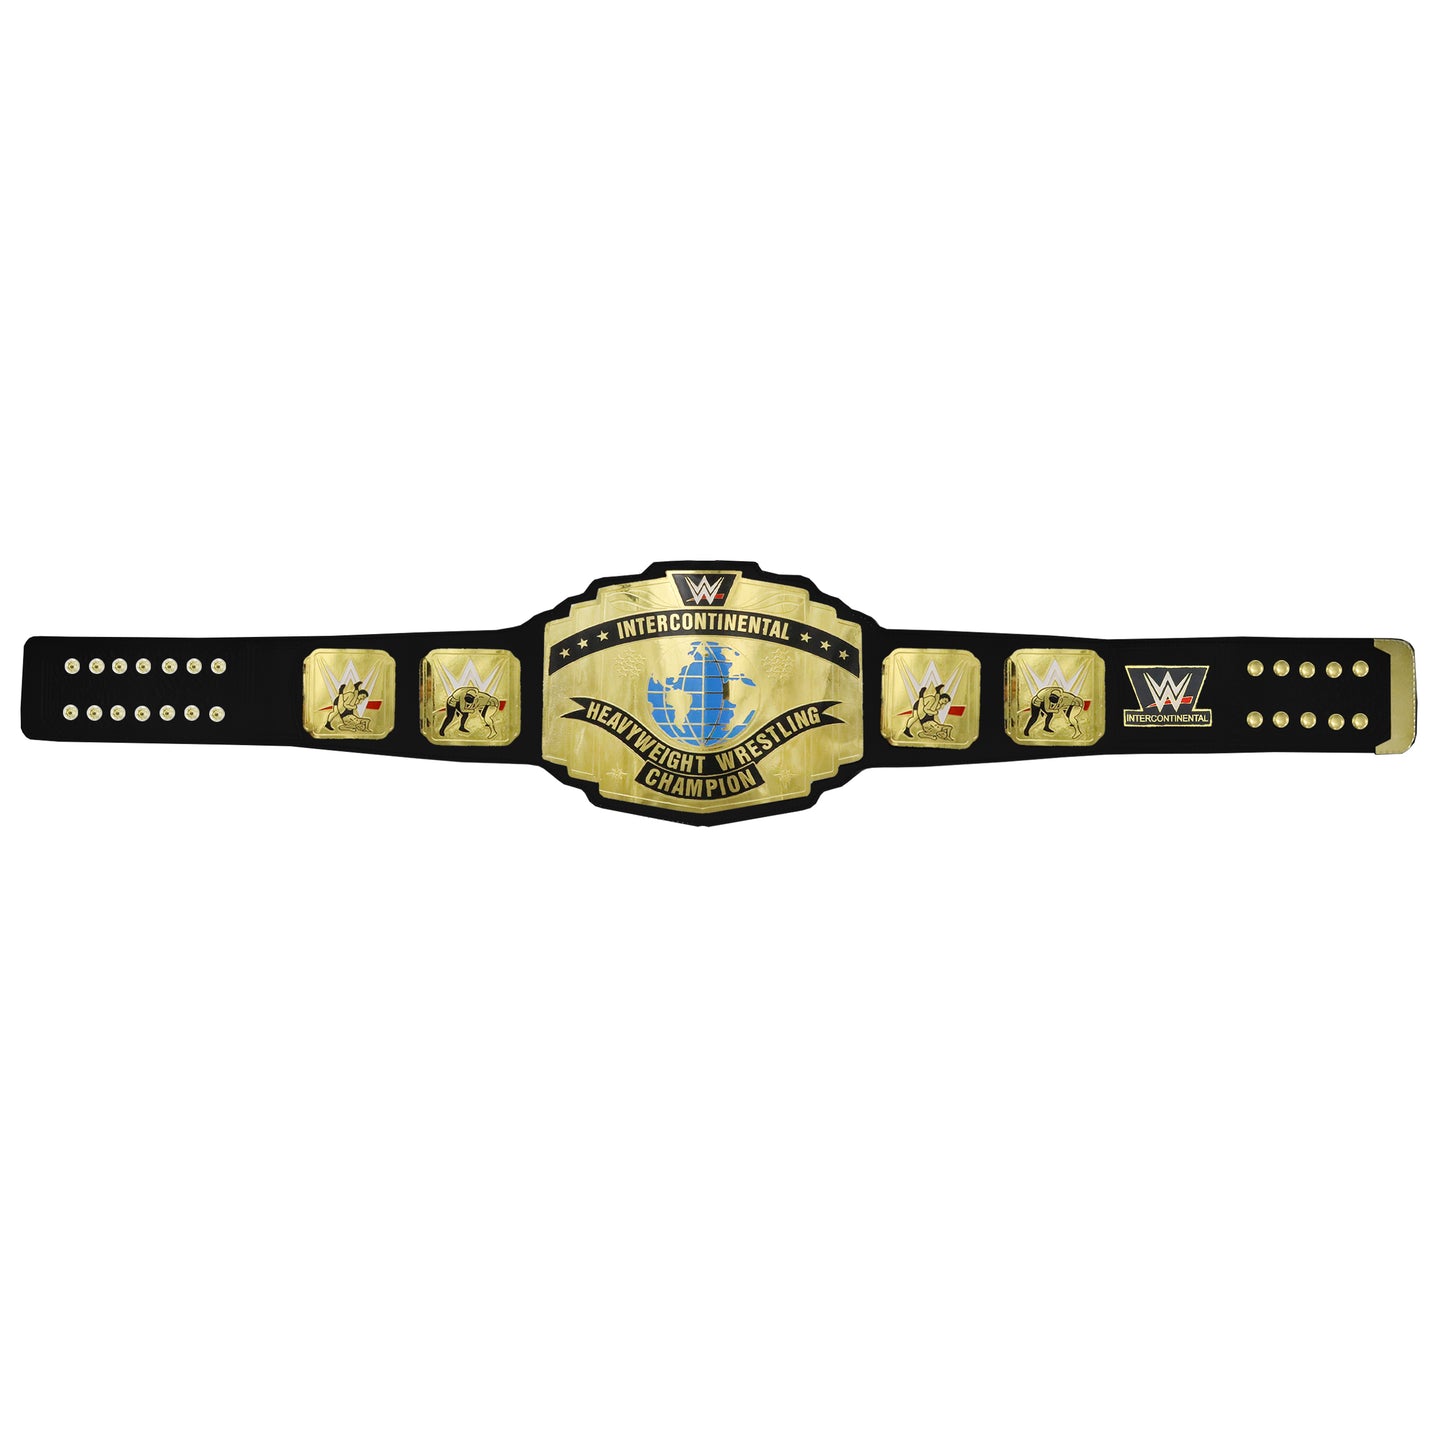 TRUESAGA - Intercontinental Heavy Weight Wrestling Championship Belt Class One Replica - Adult Waist Size Up to 46" - 2mm Metal Plate Genuine Leather Base